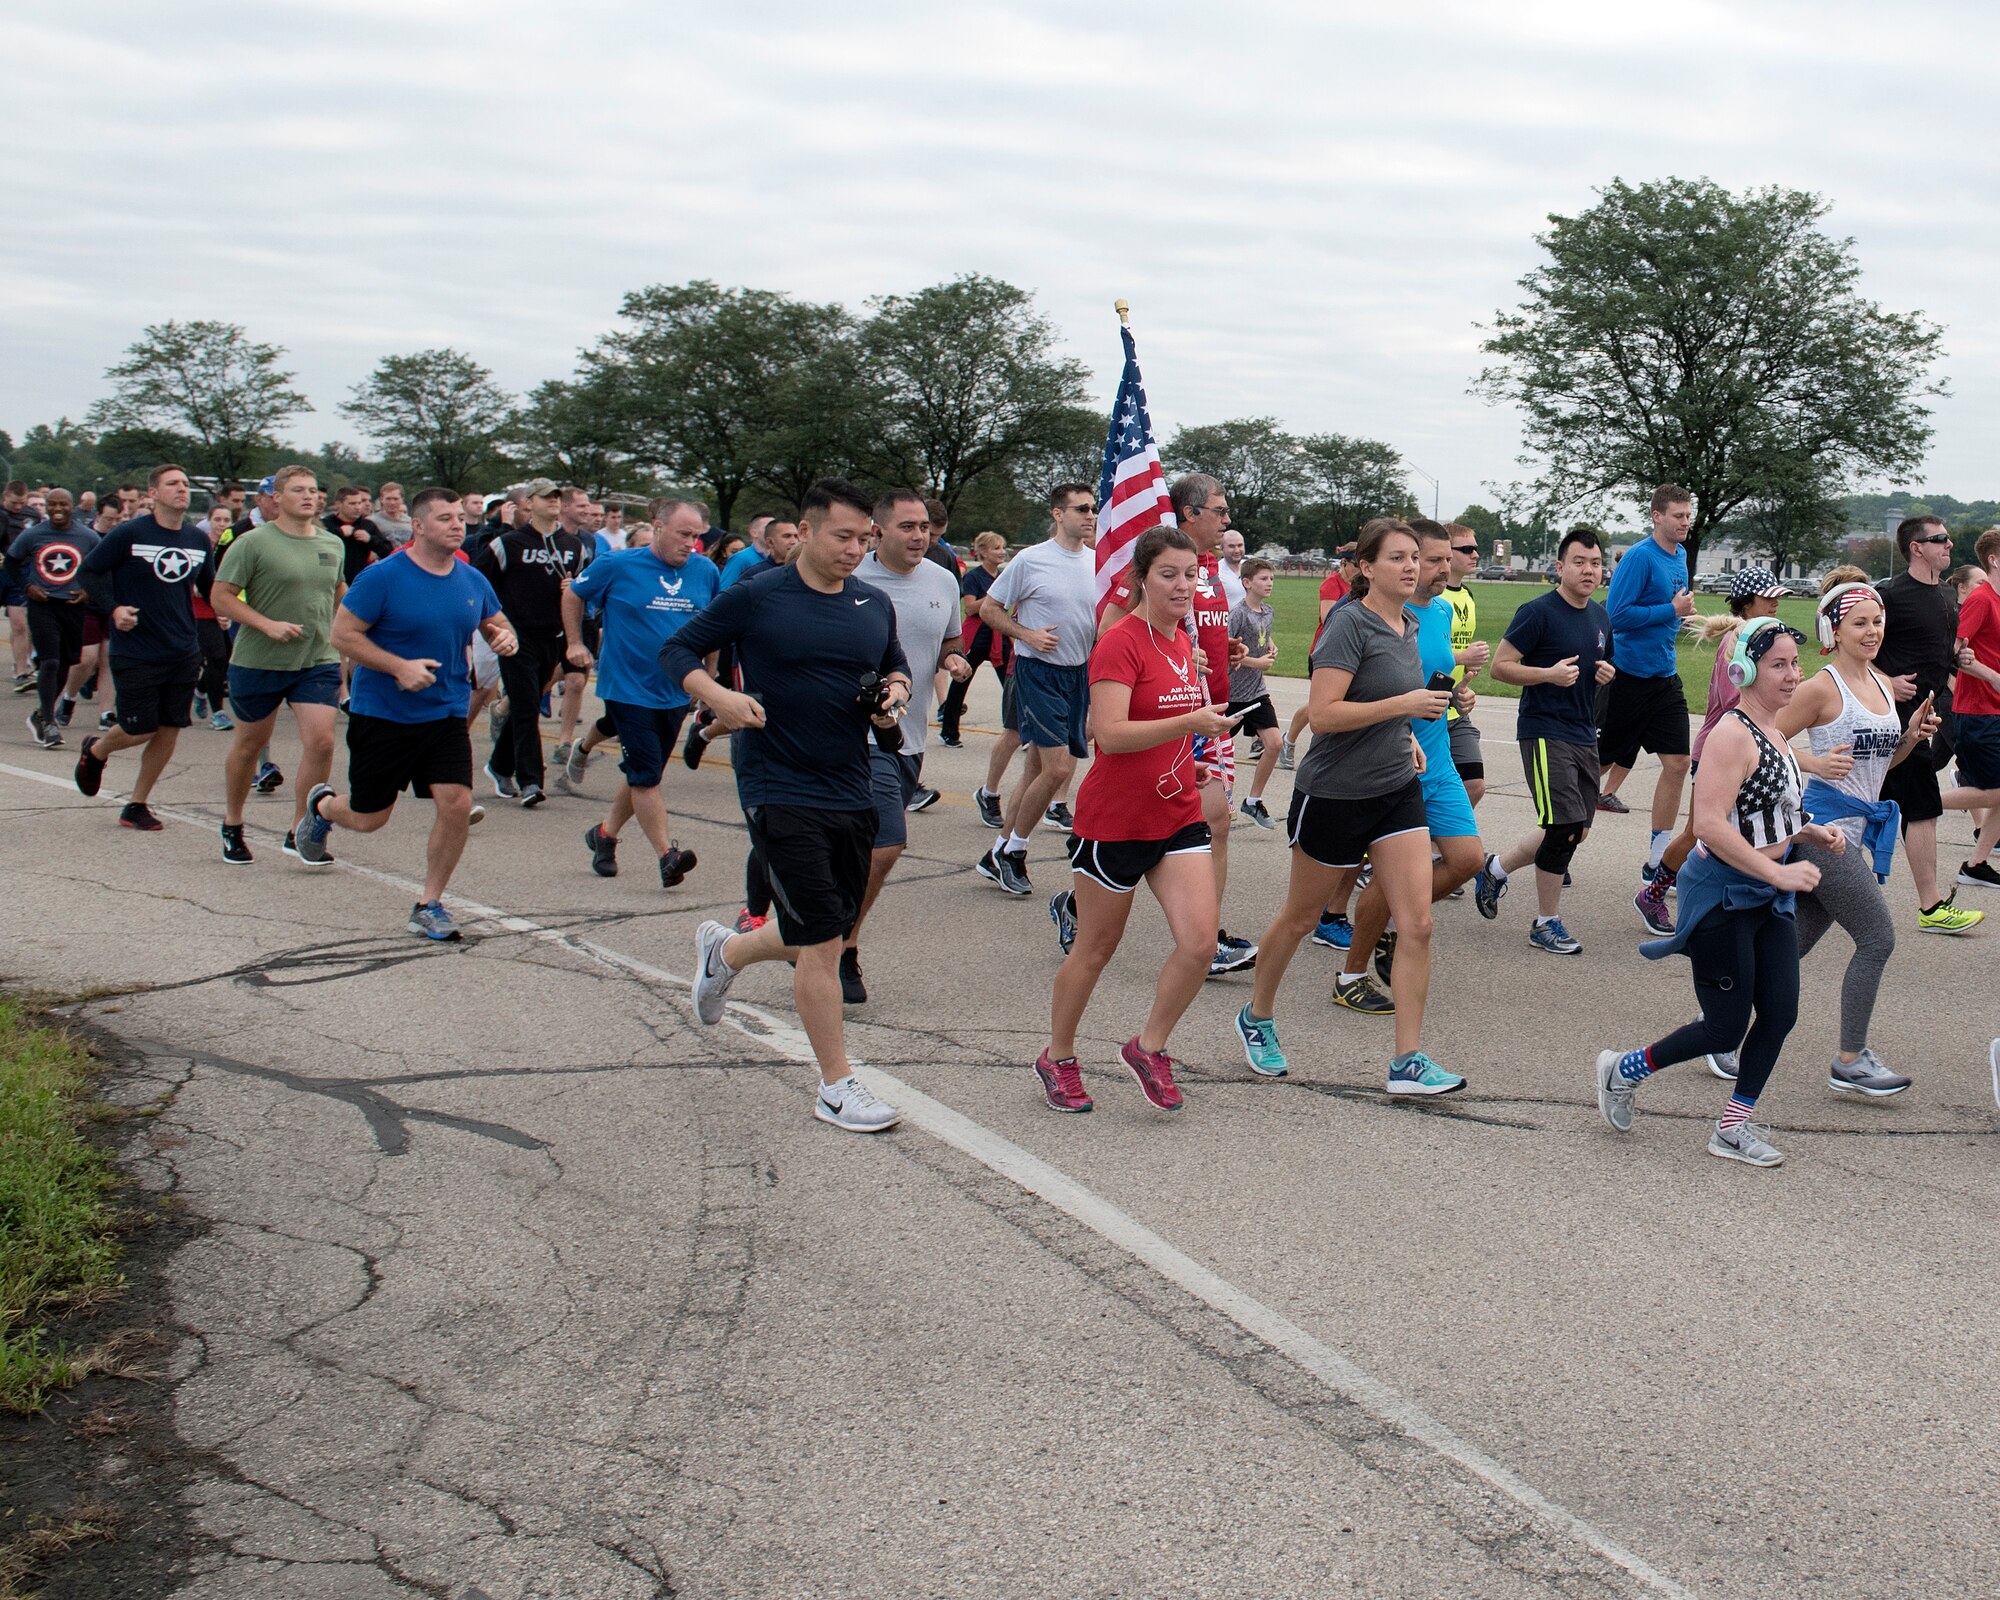 Participants run during the annual Run for the Fallen event at Wright-Patterson Air Force Base, Ohio, Sept. 11, 2018. The Run for the Fallen provides an opportunity to remember and honor those who lost their lives and recognize those who continue to defend the nation. (U.S. Air Force photo by Michelle Gigante)